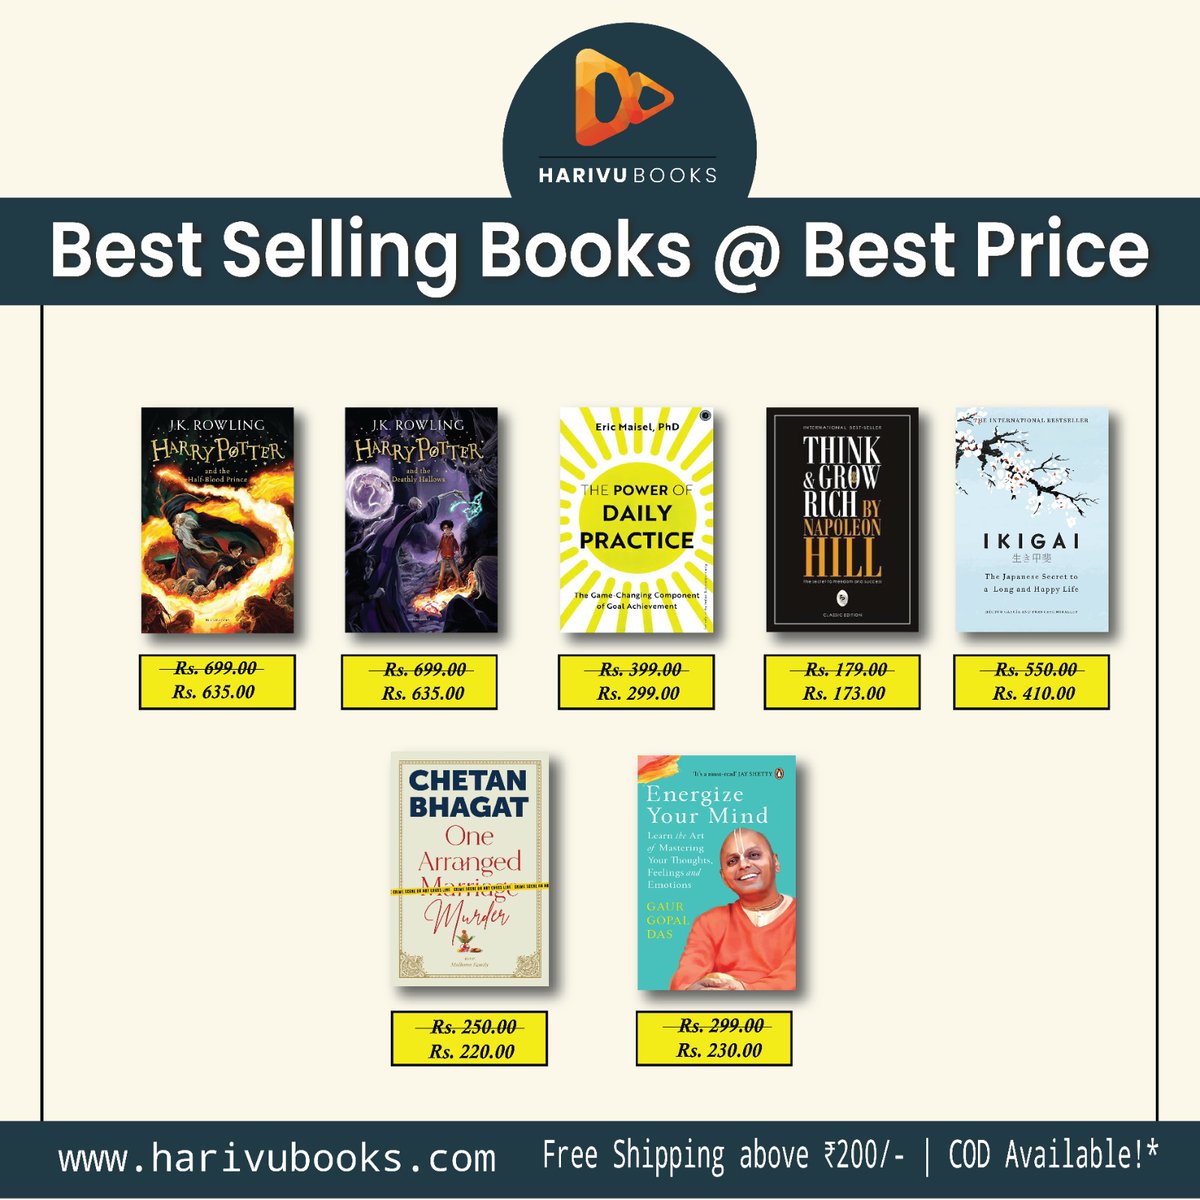 Get Amazing Discounts on Best-Selling English Books! 

👉 Shop Now: harivubooks.com/kn/collections…

#English #englishbooks #offer #discount #bestsellingbooks #harivu